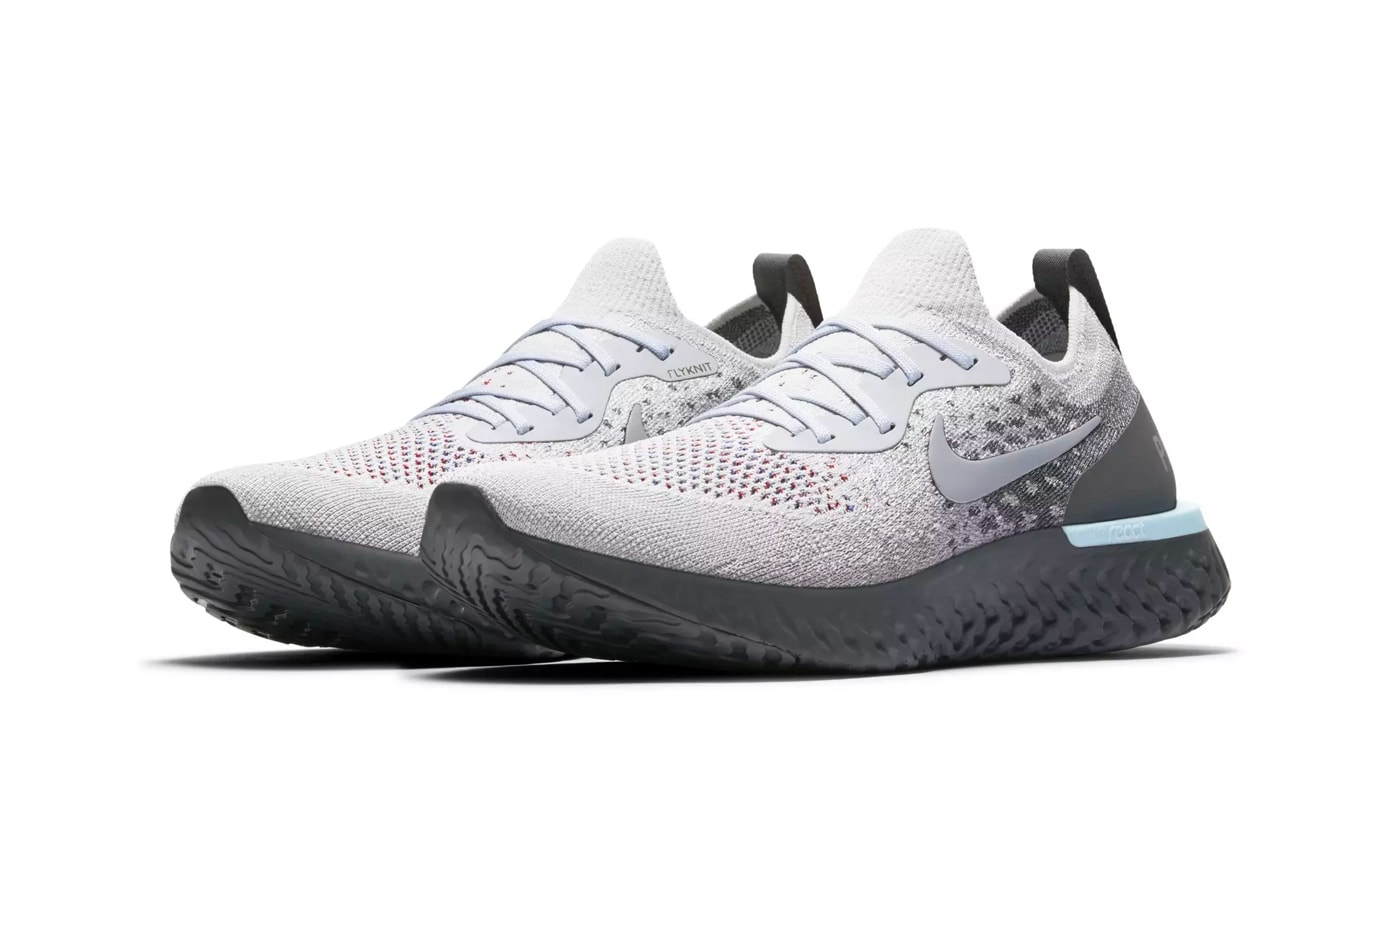 Nike Epic React Flyknit "Paris" "Light Cream/Wolf Grey" release date info price colorway sneaker europe purchase us 